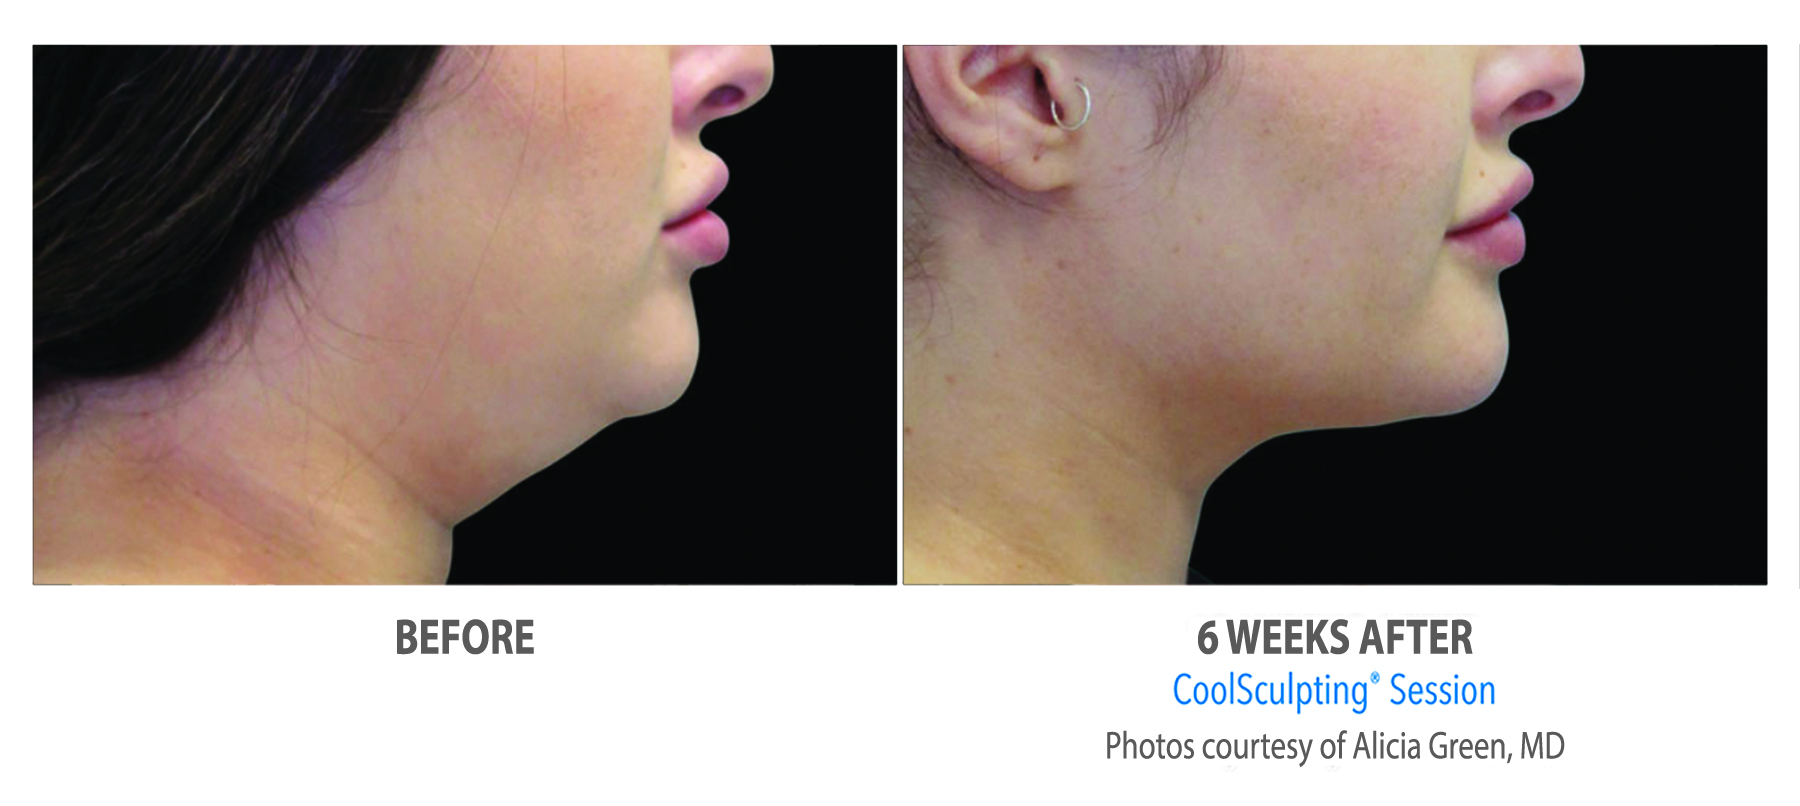 Before and after CoolSculpting treatments